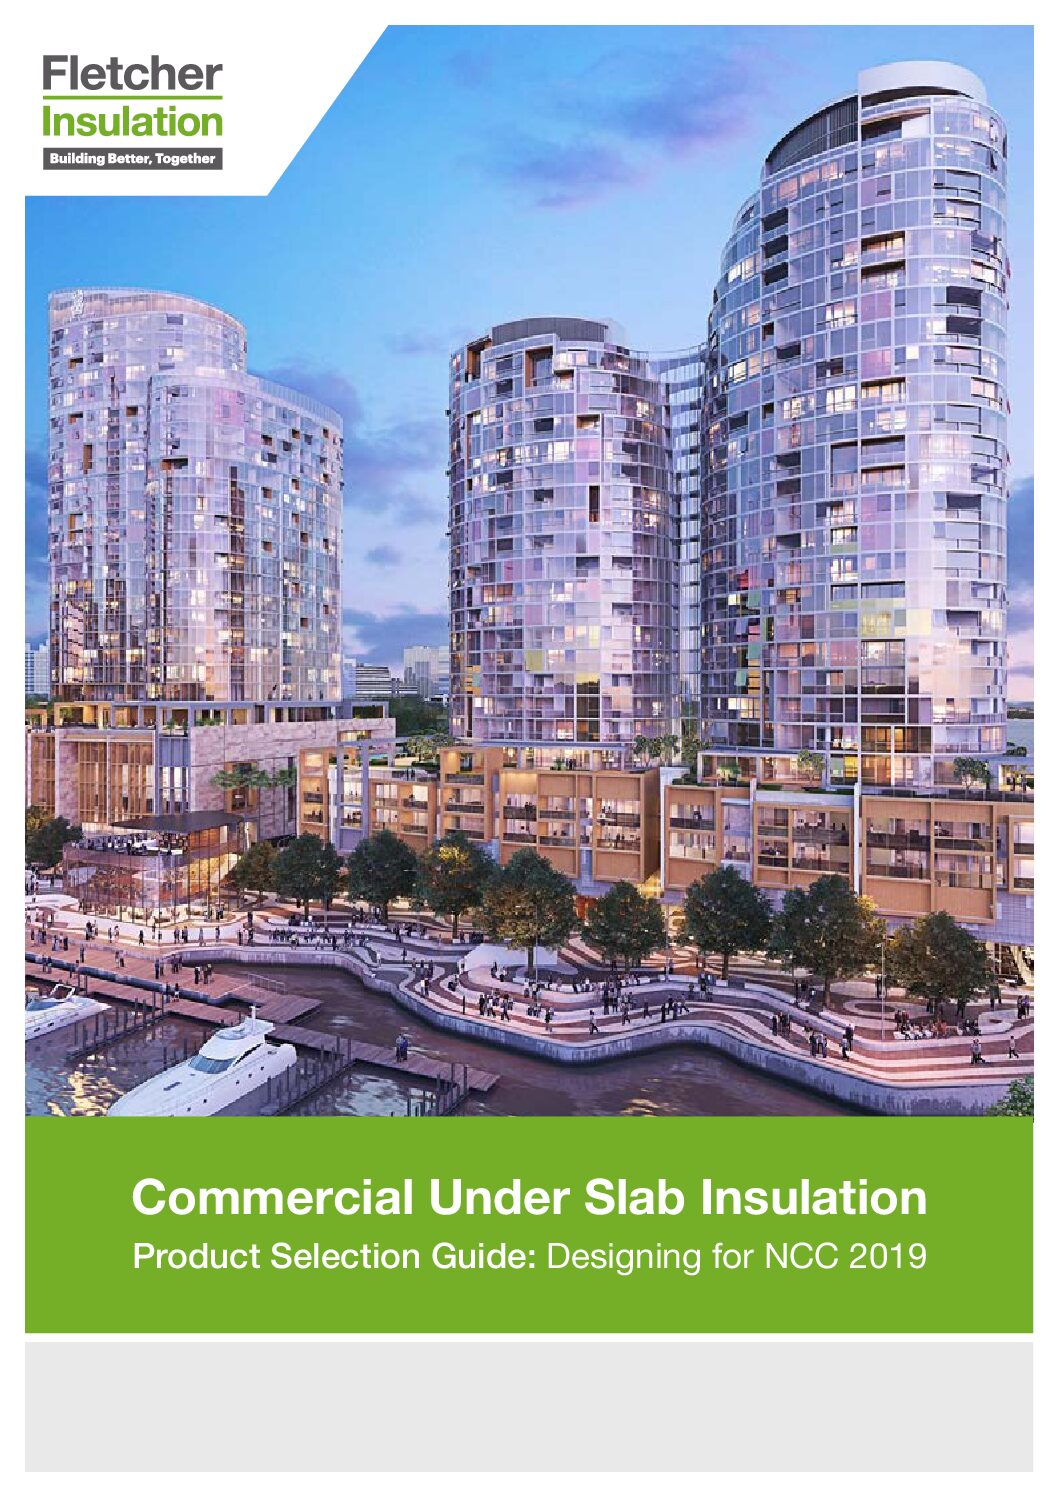 Commercial Under Slab Insulation Product Selection guide NCC 2019.